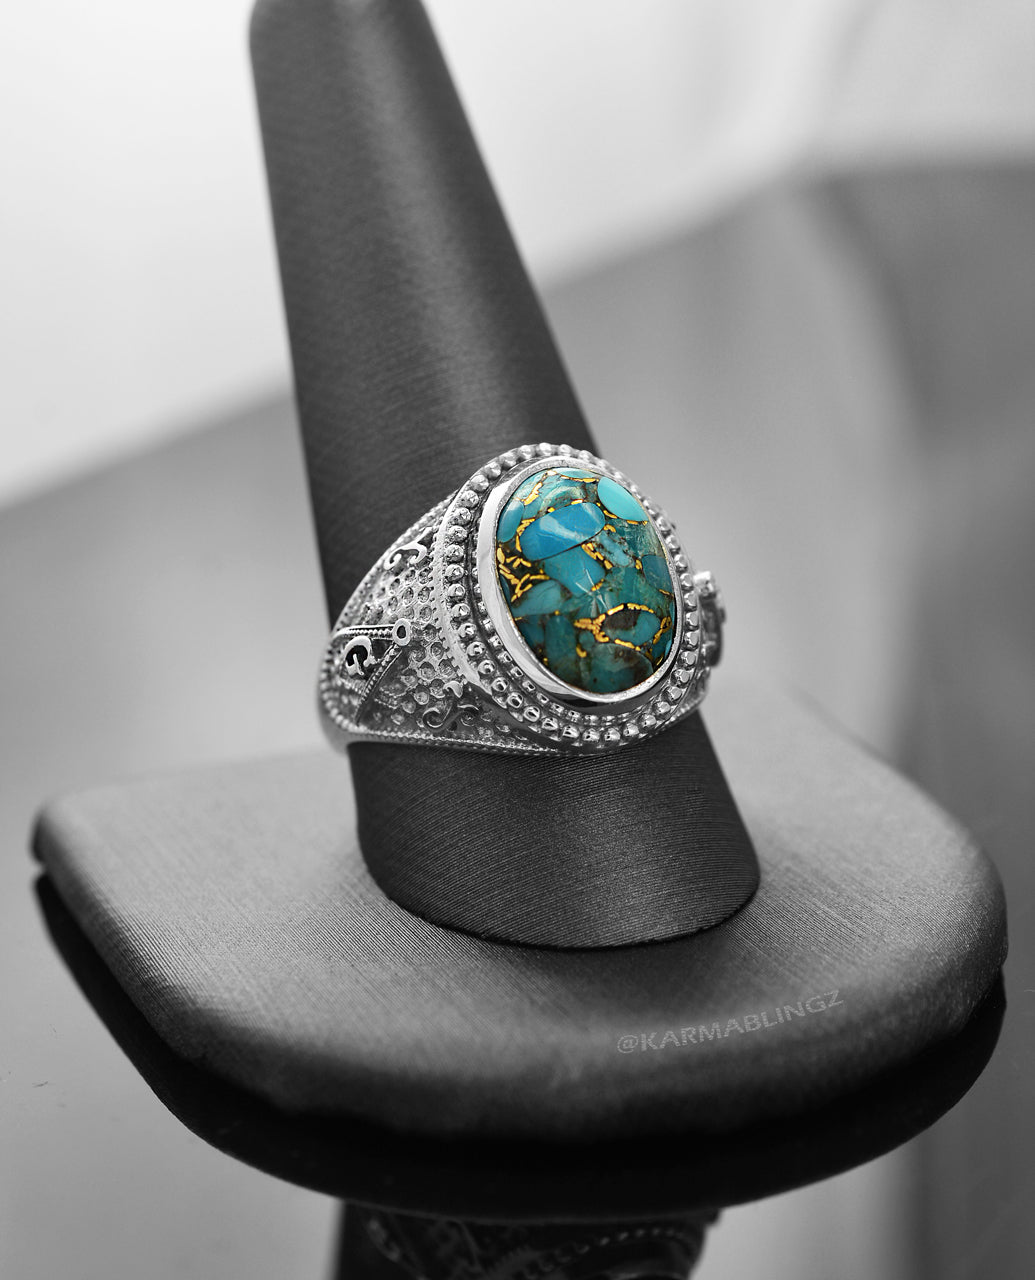 Sterling Silver Masonic Ring with Blue Copper Turquoise Karma Blingz